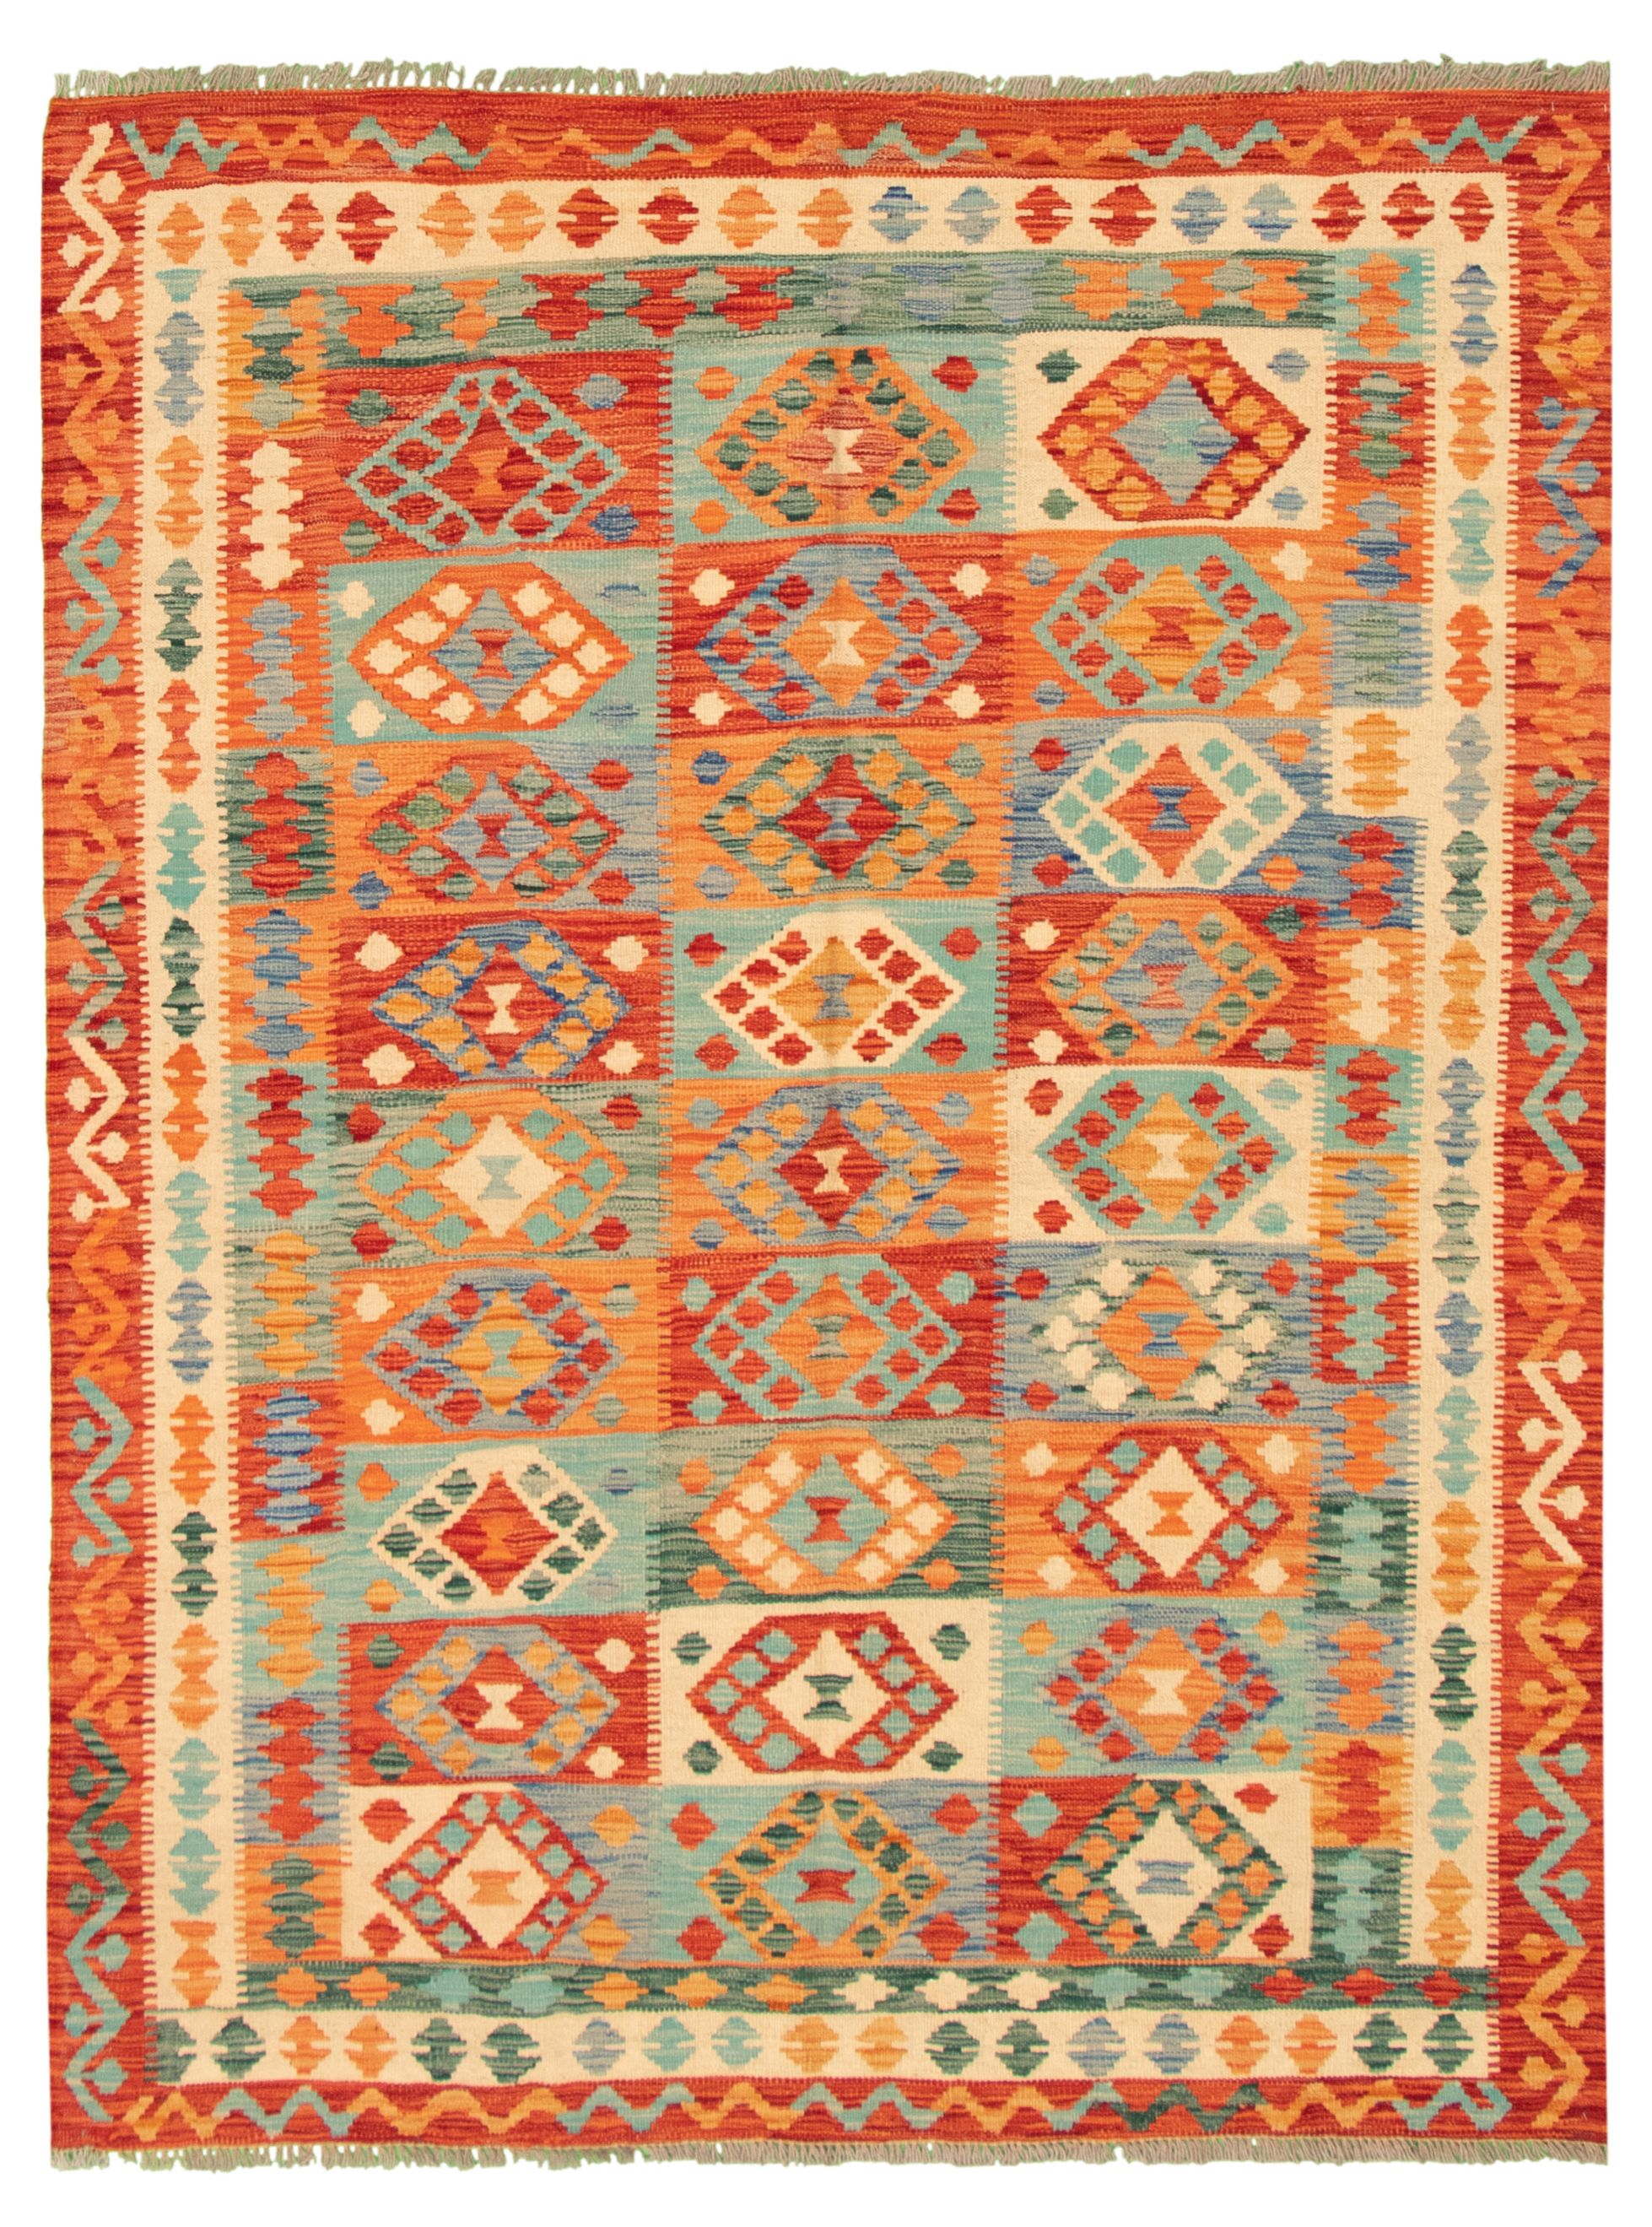 Hand woven Bold and Colorful  Red Wool Kilim 5'11" x 7'10"  Size: 5'11" x 7'10"  